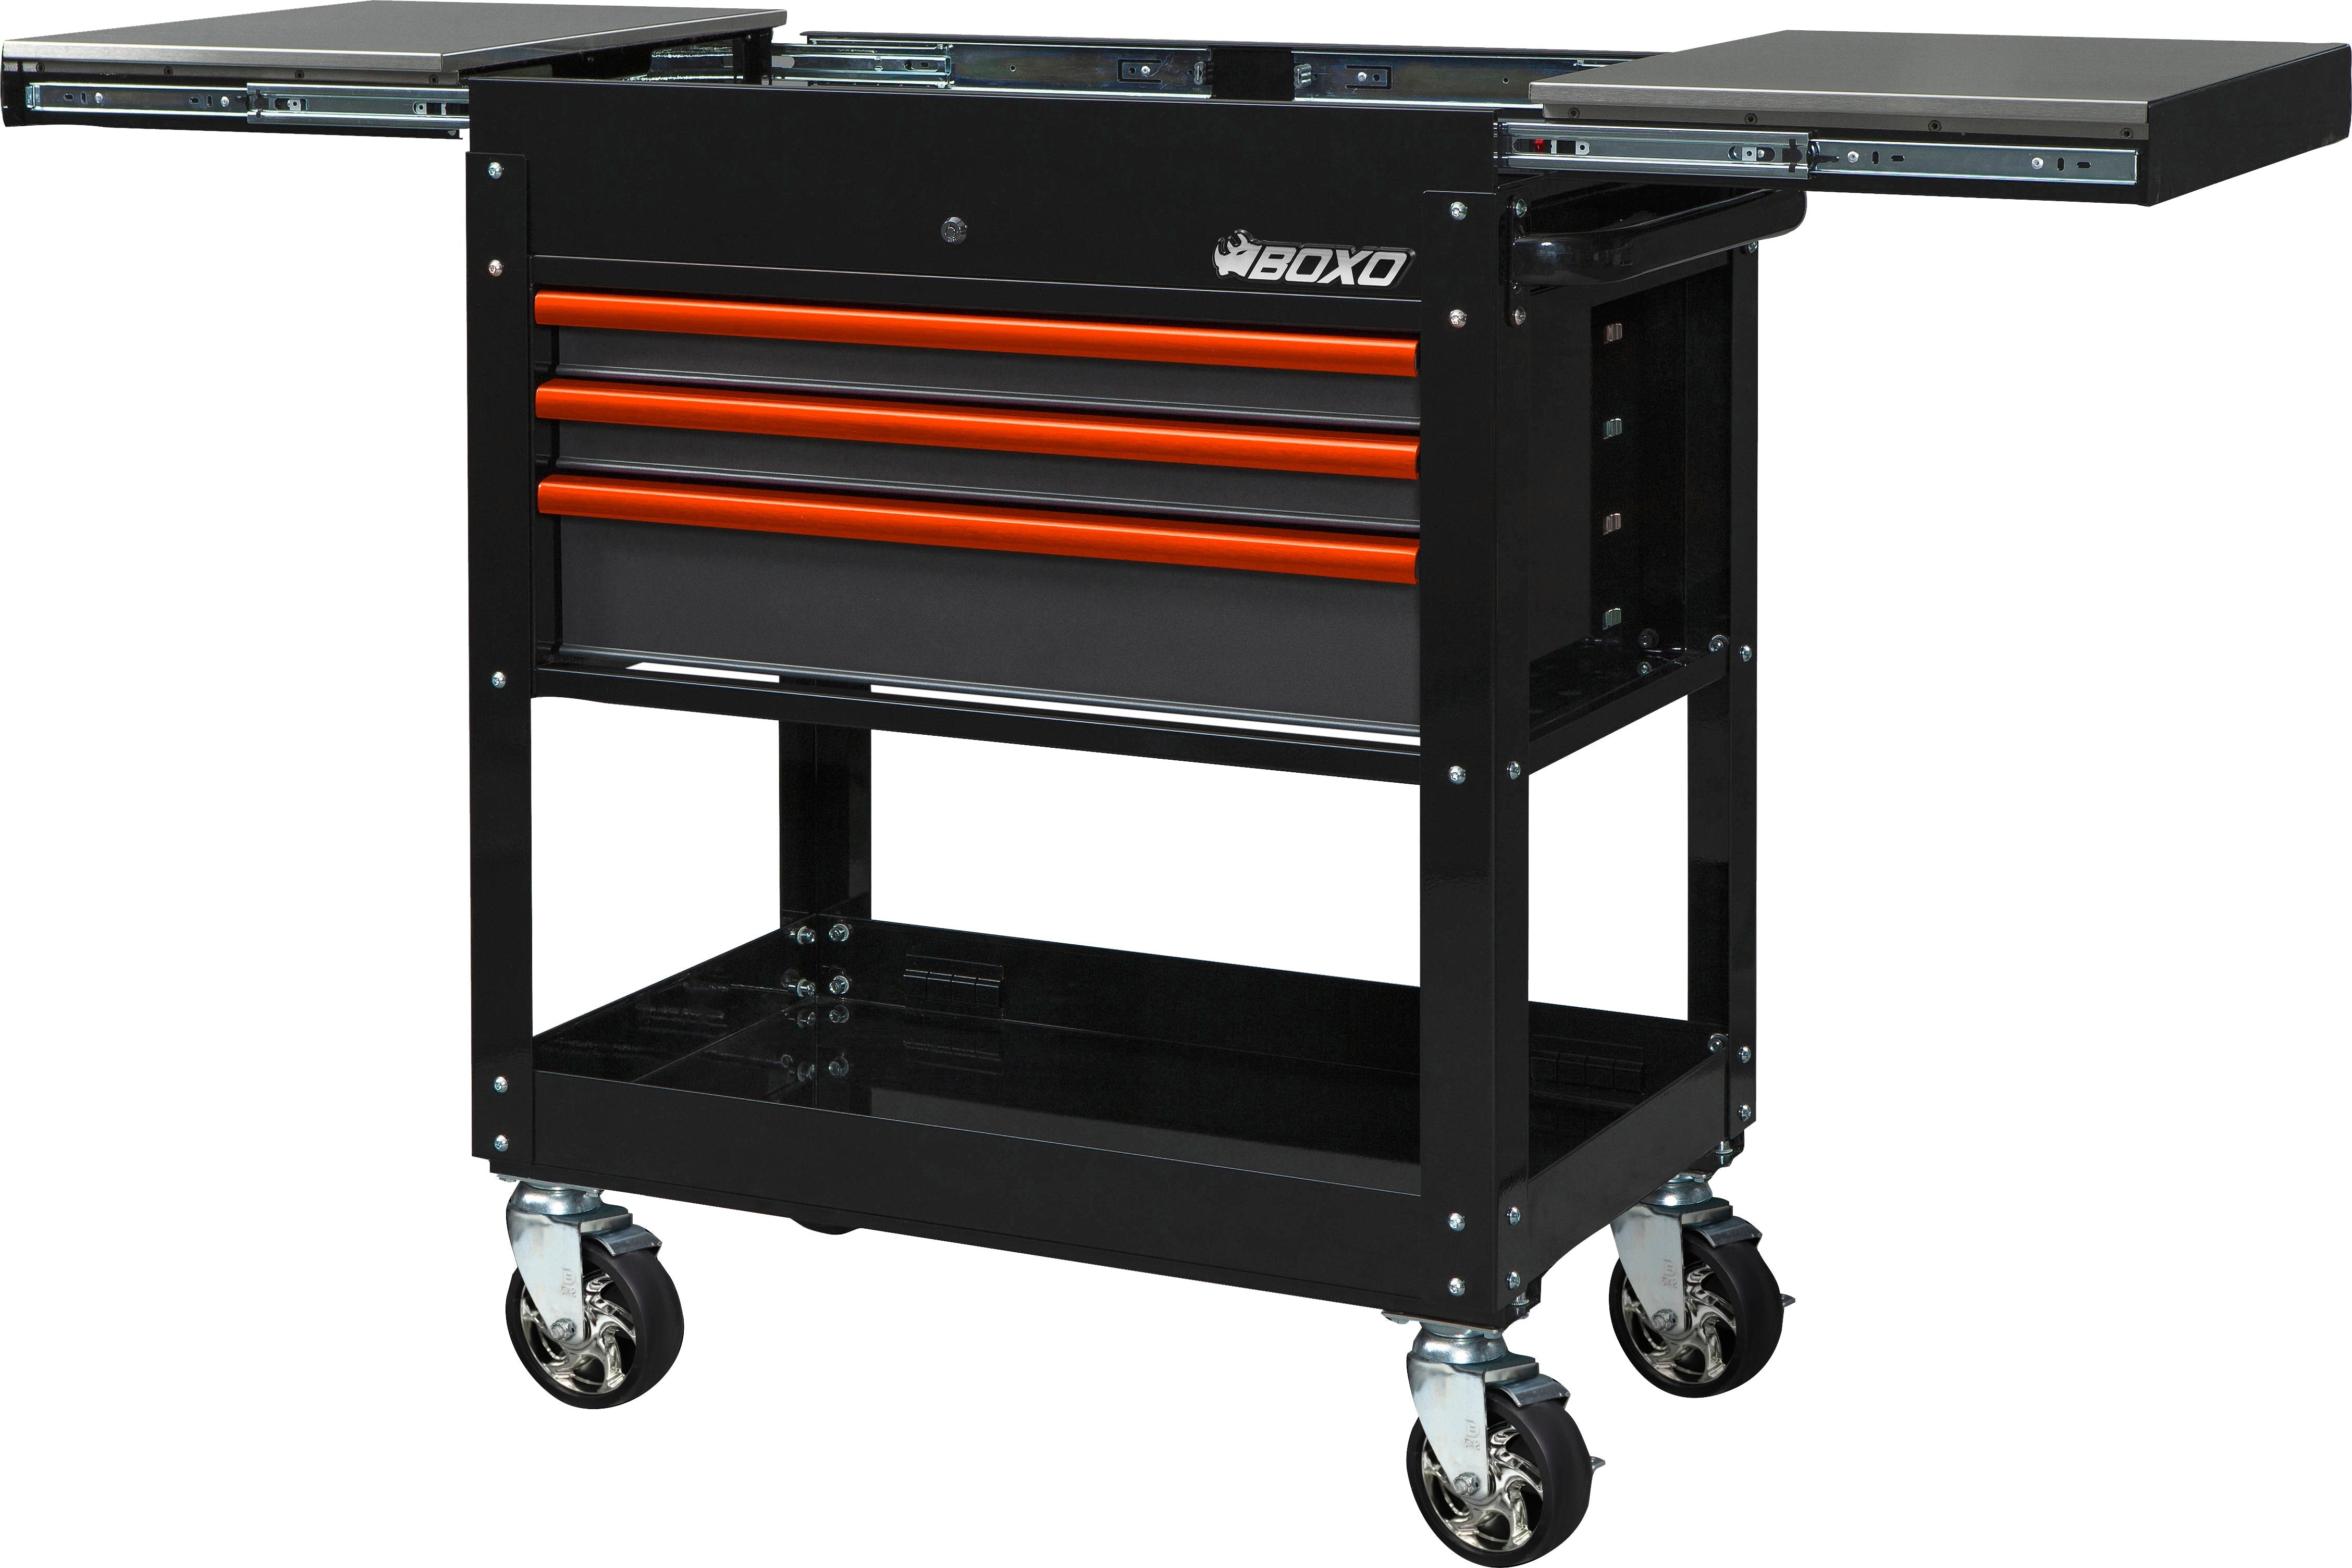 BOXO 34" 3 Drawer Slide Top Service Cart with Drawer Trim Pack - Black Body & Trim Colour options